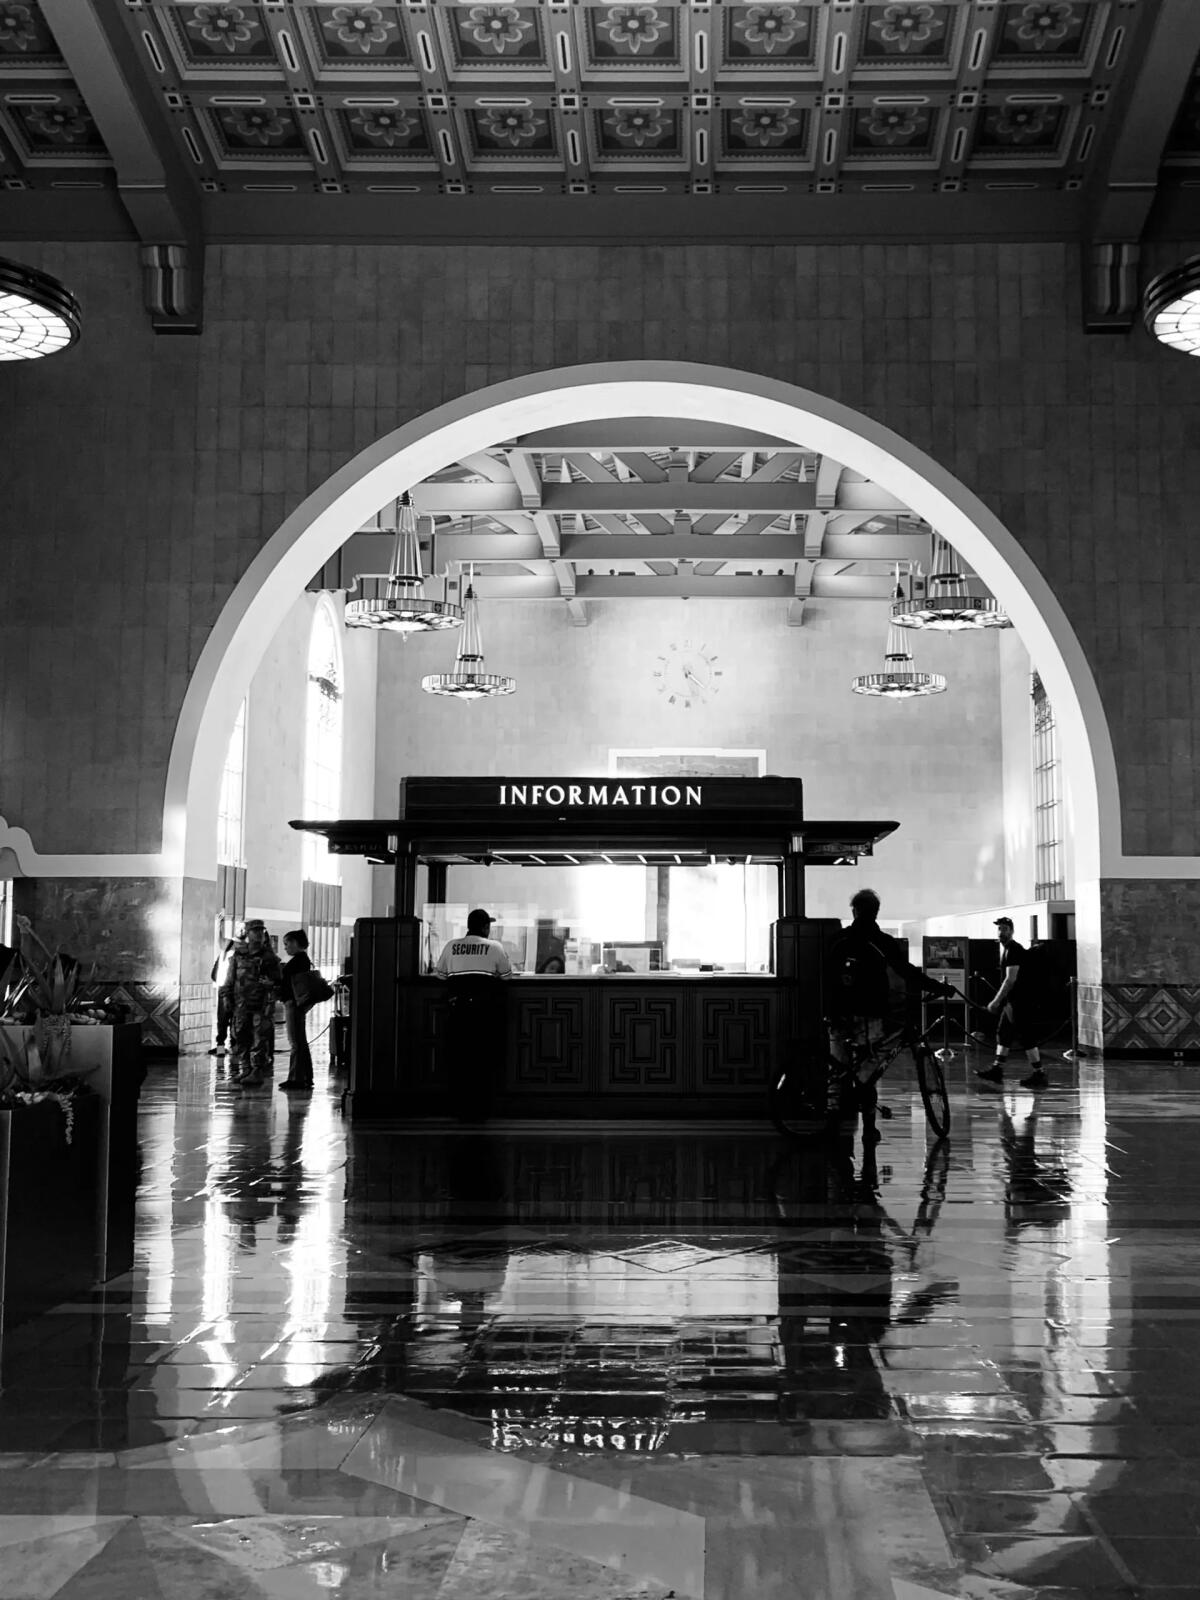 A black and white photo shows a kiosk within a cavernous, tiled space.